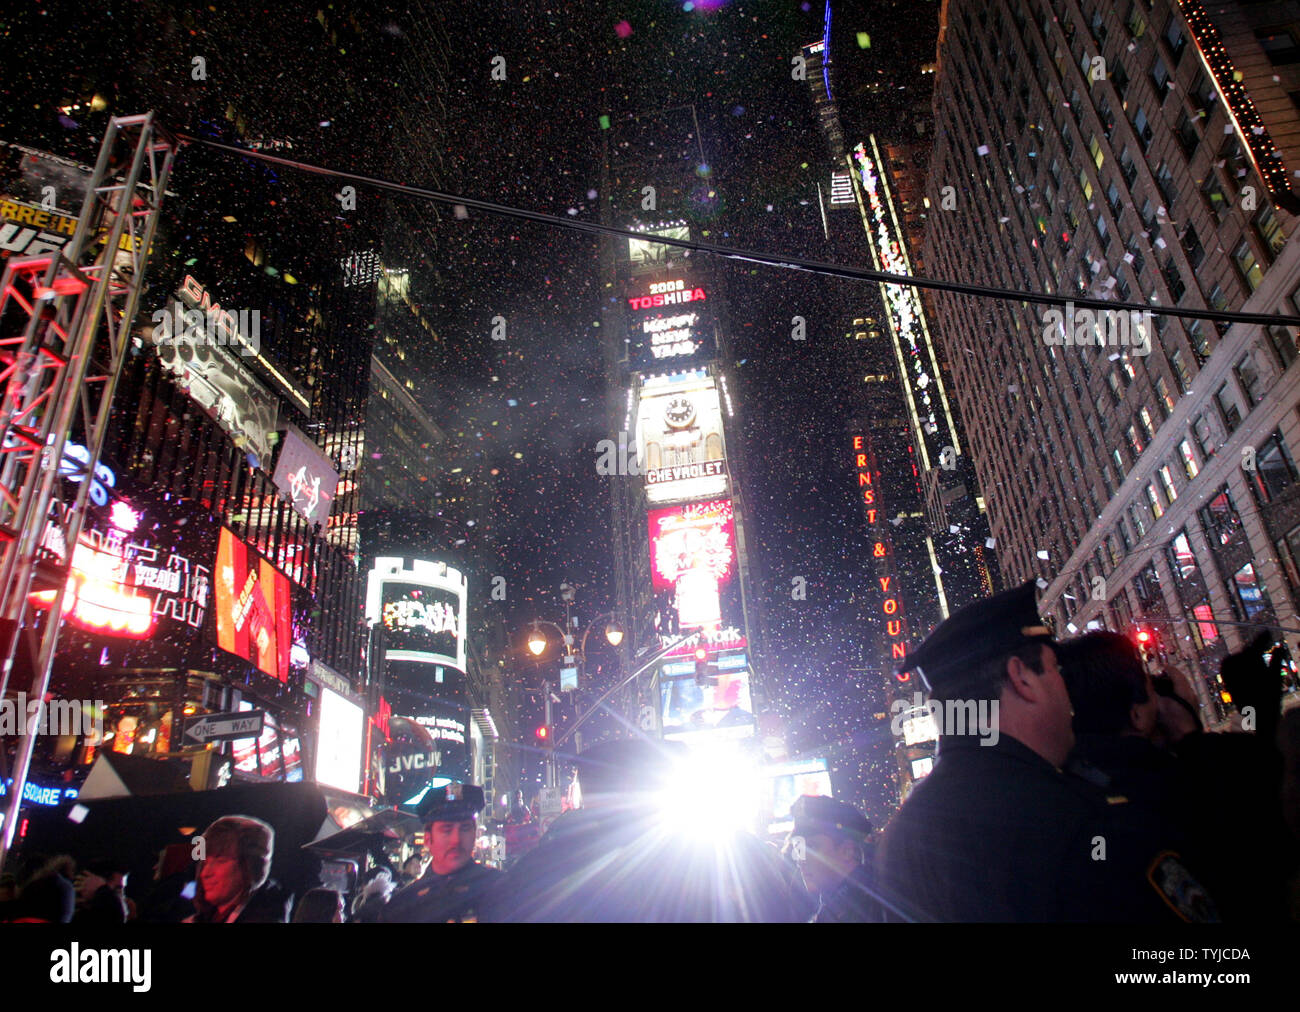 Confetti rains down at the stoke of midnight on the hundreds of thousands of revelers  gathered in Times Square to celebrate New Year's Eve on January 1, 2008 in New York. (UPI Photo/Monika Graff). Stock Photo